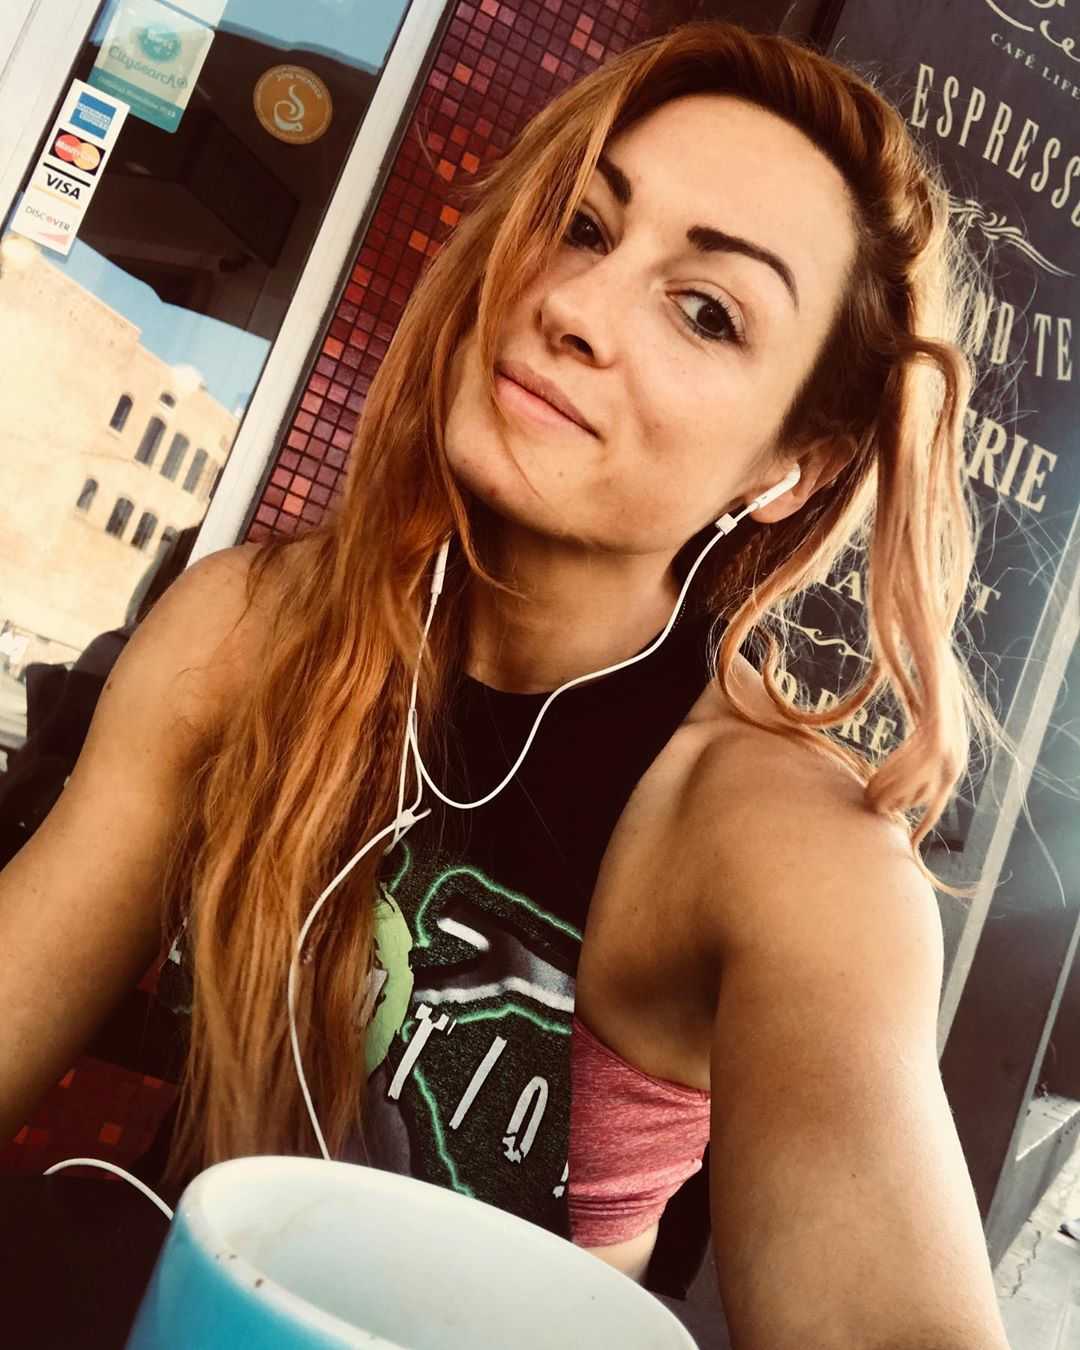 70+ Hot And Sexy Pictures of Becky Lynch – WWE Diva Will Sizzle You Up 4